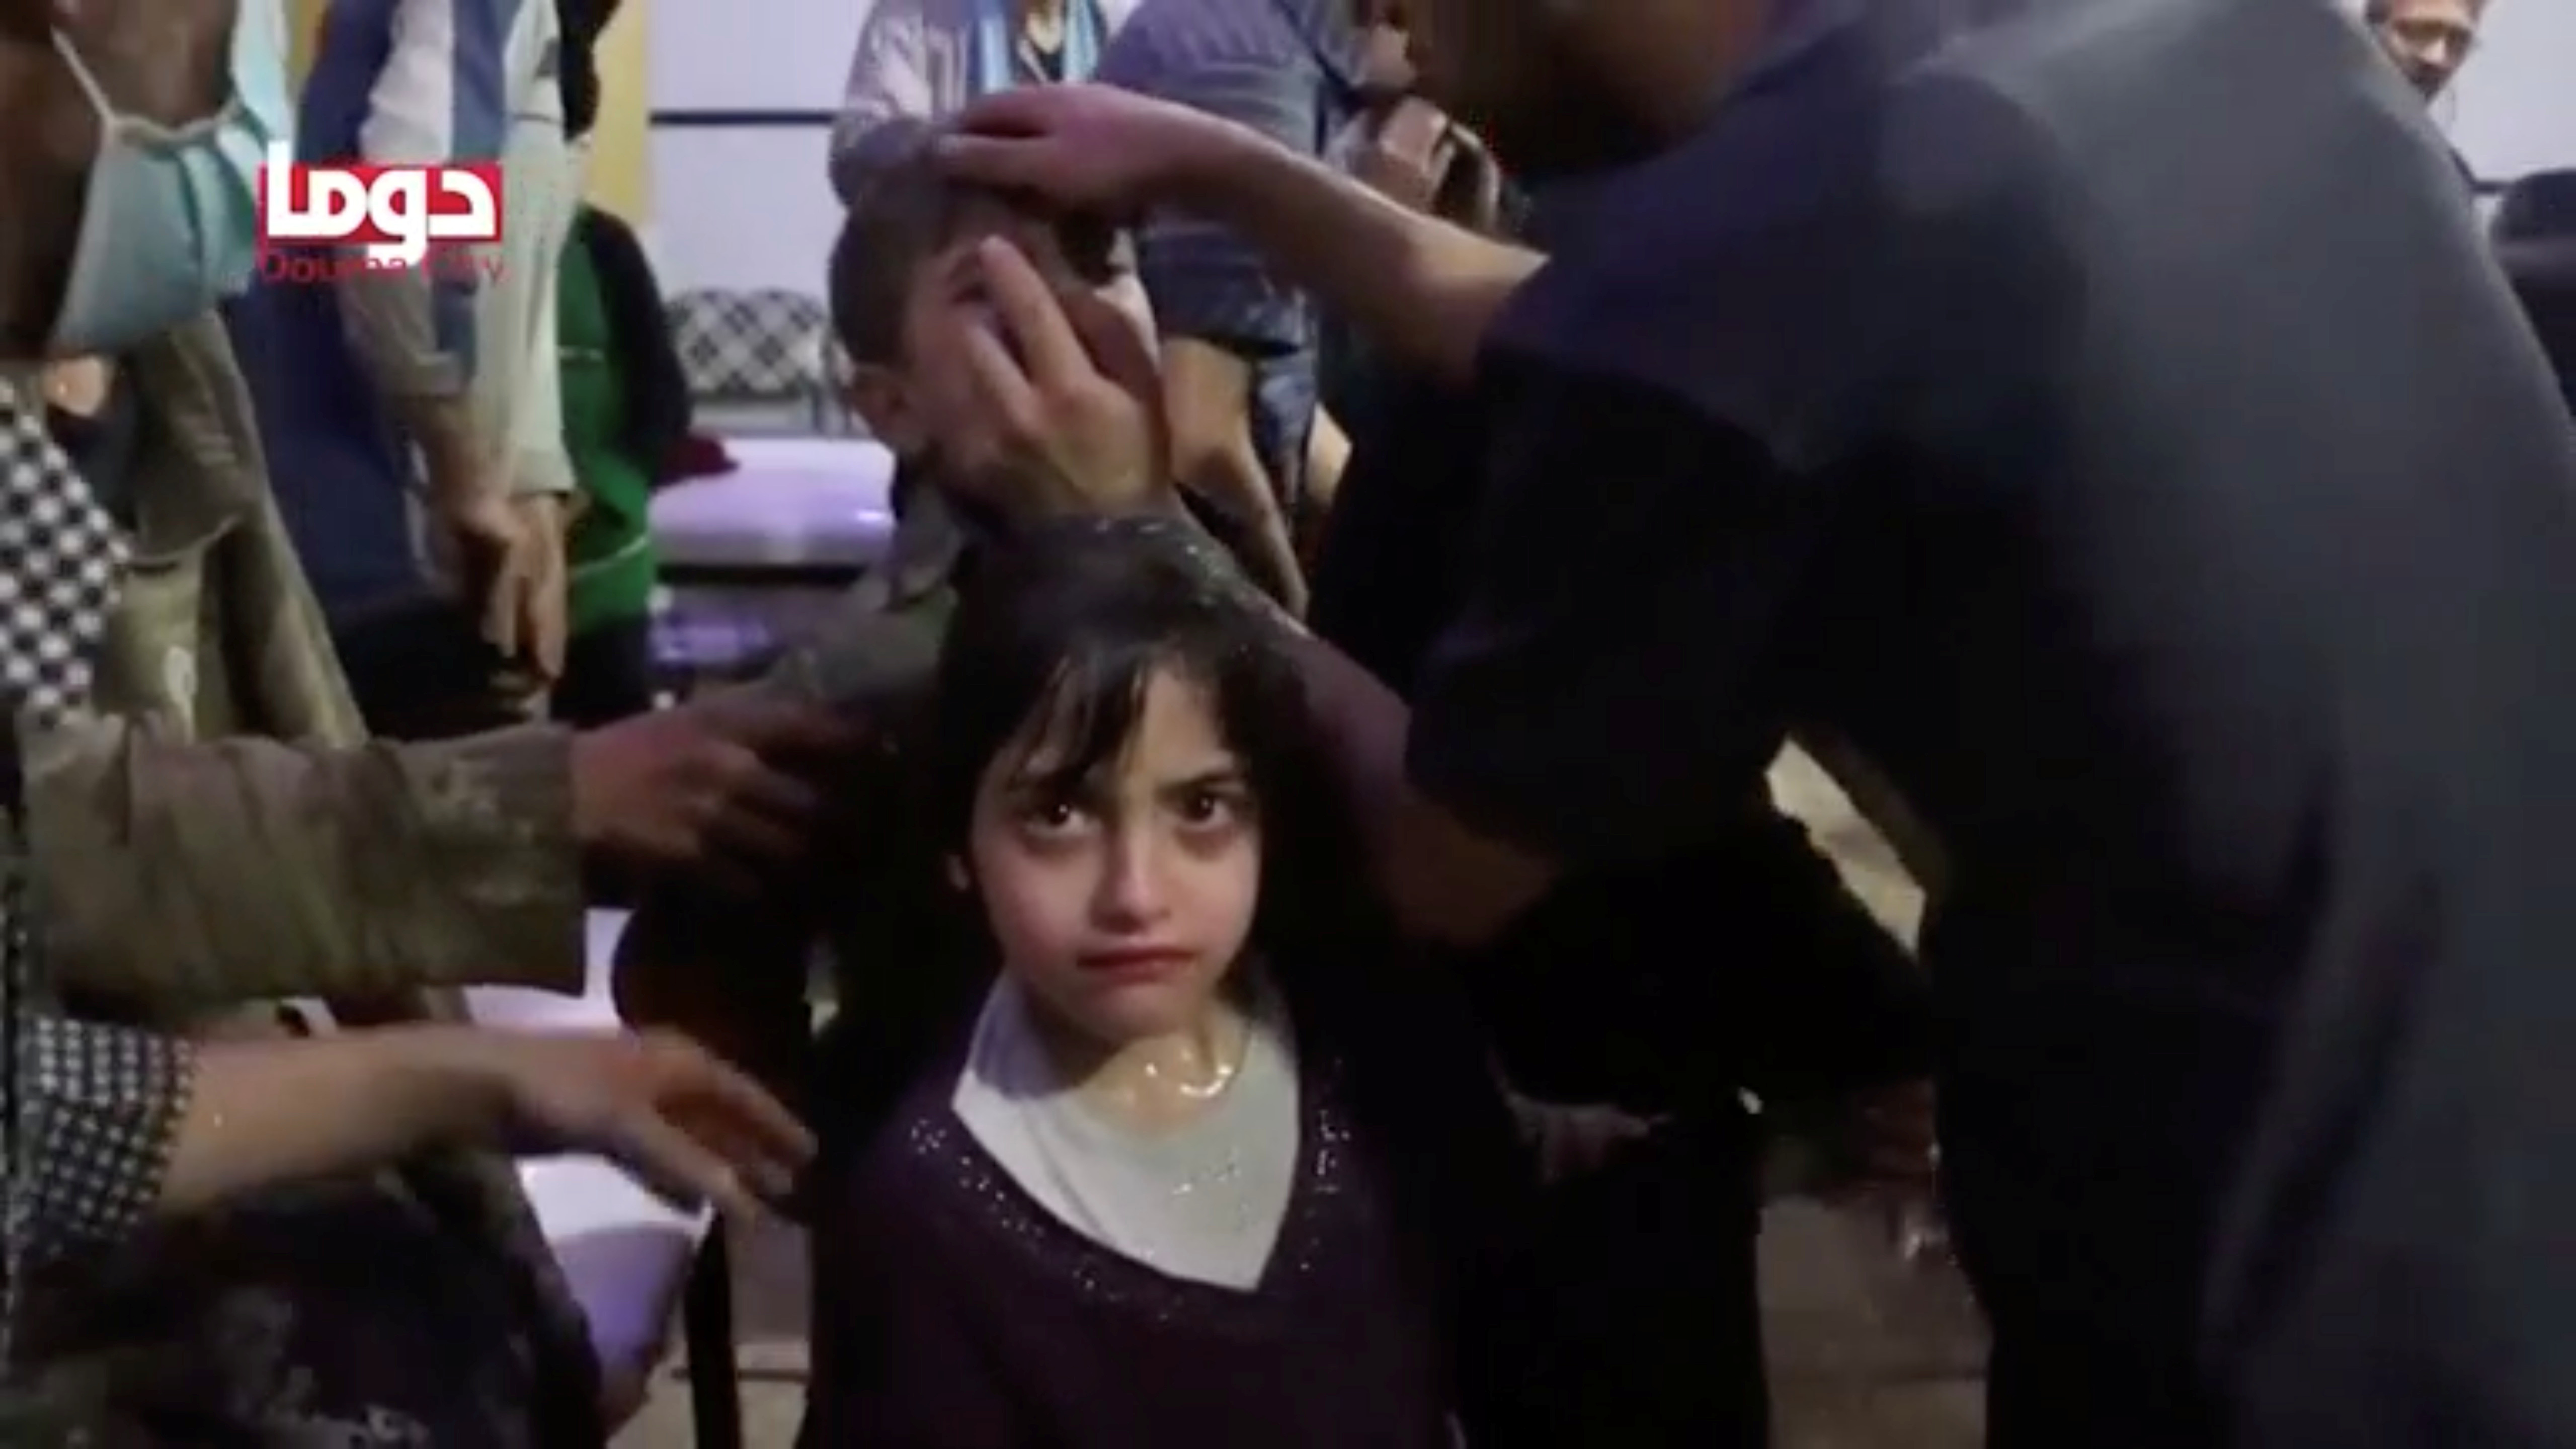 A girl looks on following alleged chemical weapons attack, in what is said to be Douma